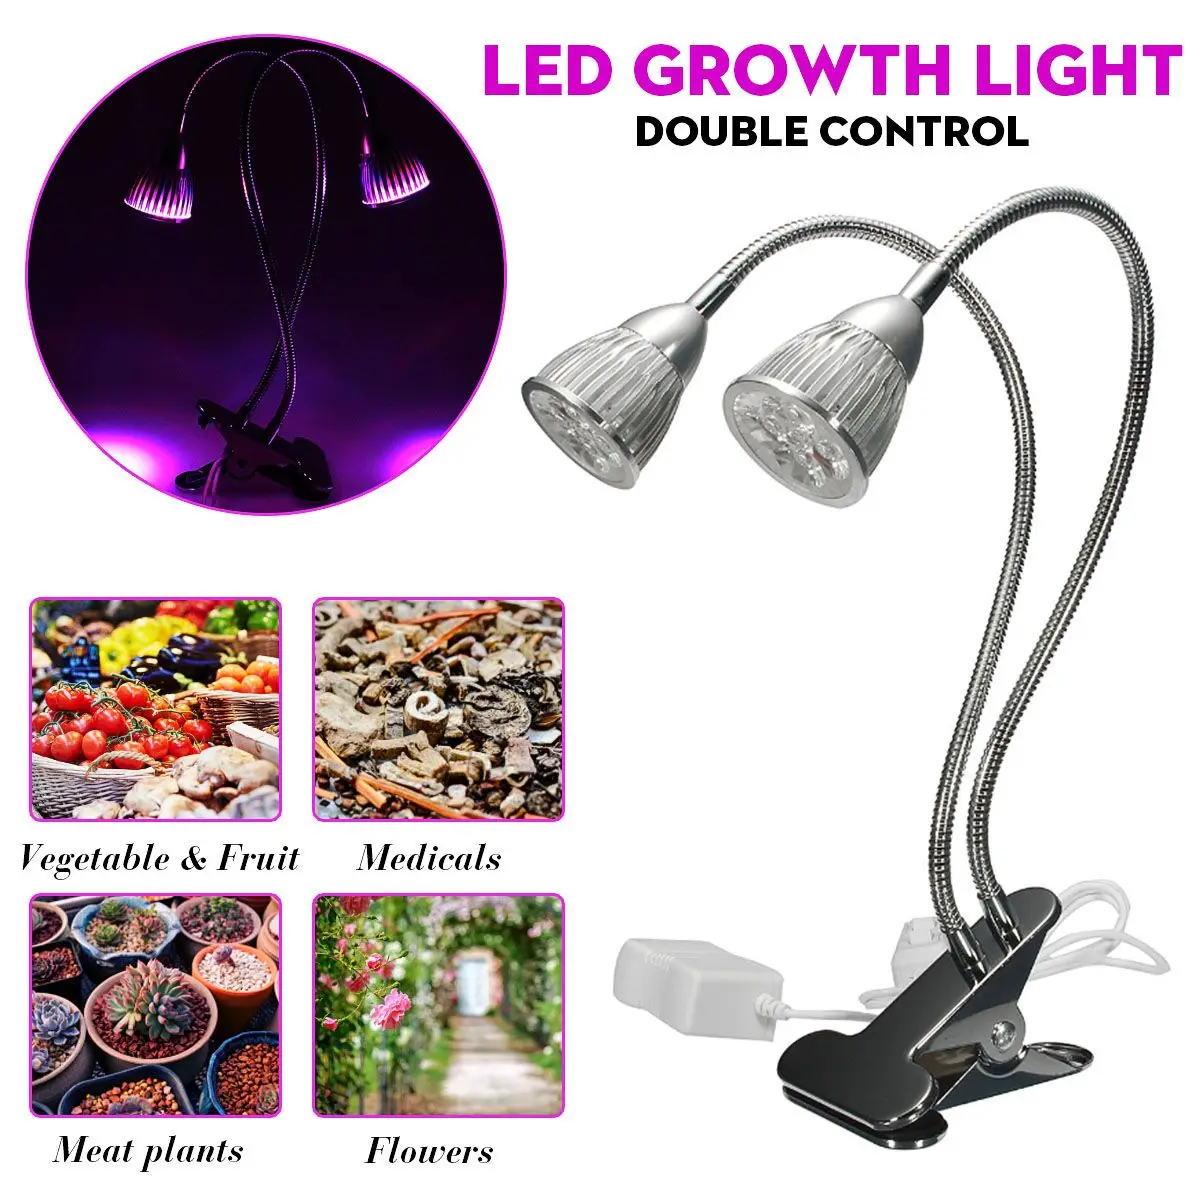 

10W AC100-240V Dual Head LED Grow Light USB Phyto Lamp Full Spectrum With Control Phytolamp For Plants Seedlings Flower